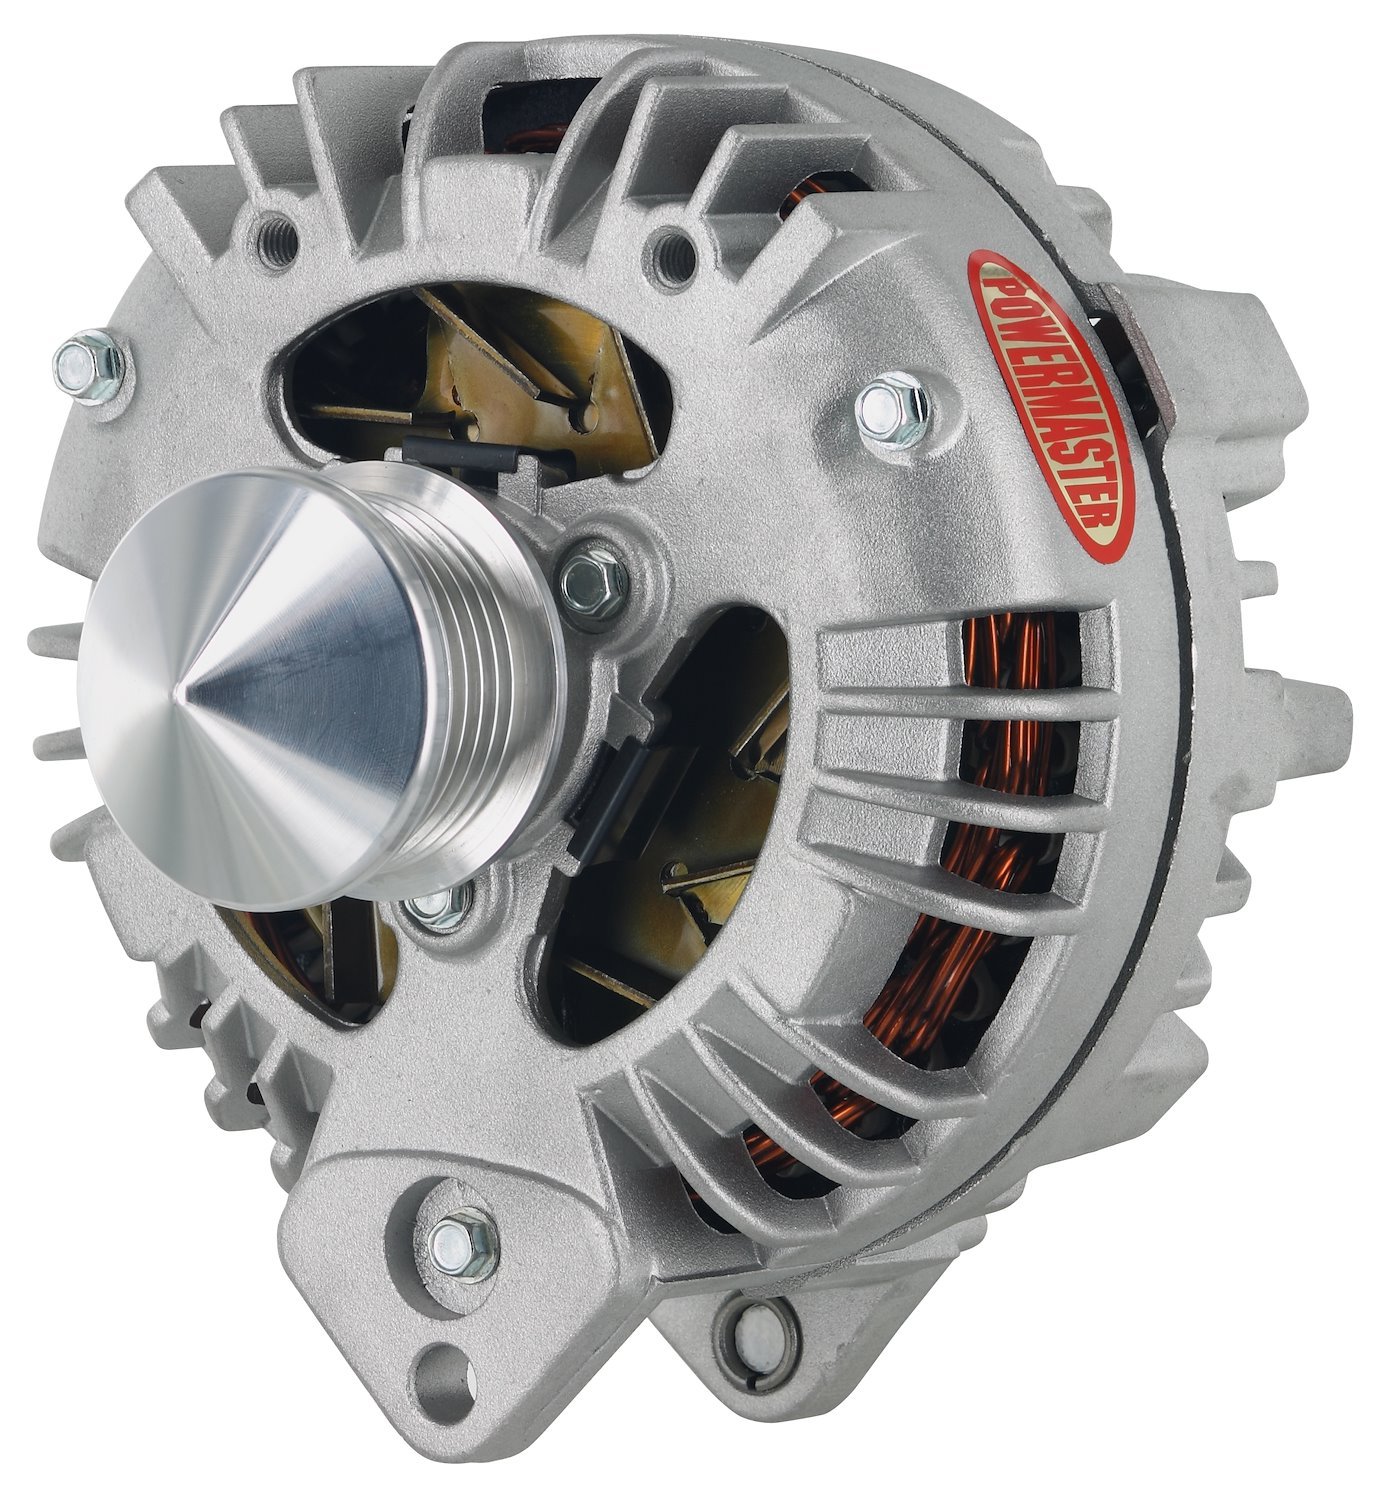 95 Amp Chrysler Square Back Alternator - Natural Finish - 6-Groove 52 mm & Cone, 1-Wire